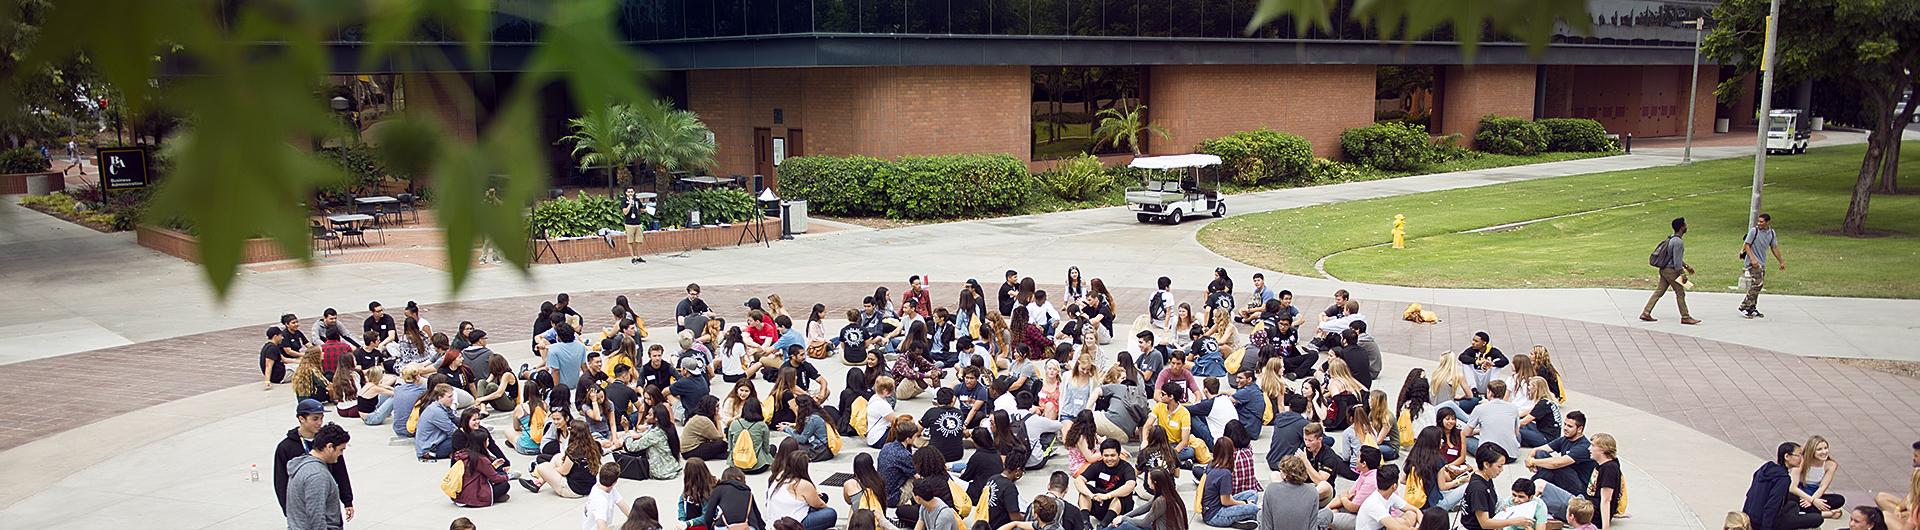 Soar Students in front of the COB Building CSULB